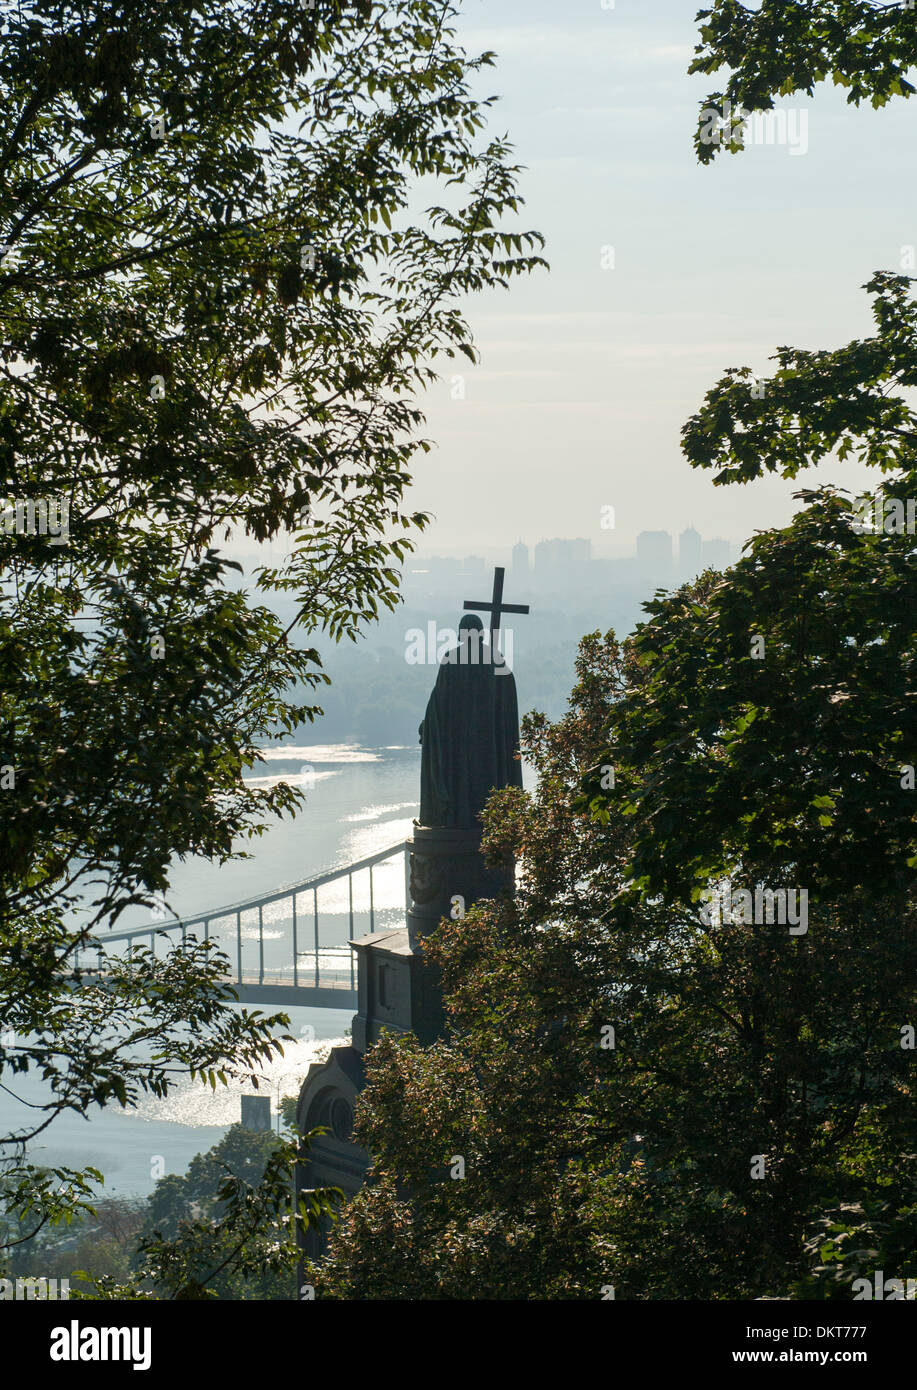 Monument to Volodymyr (Vladimir) the great overlooking the Dnieper River in Kiev, capital of Ukraine. Stock Photo